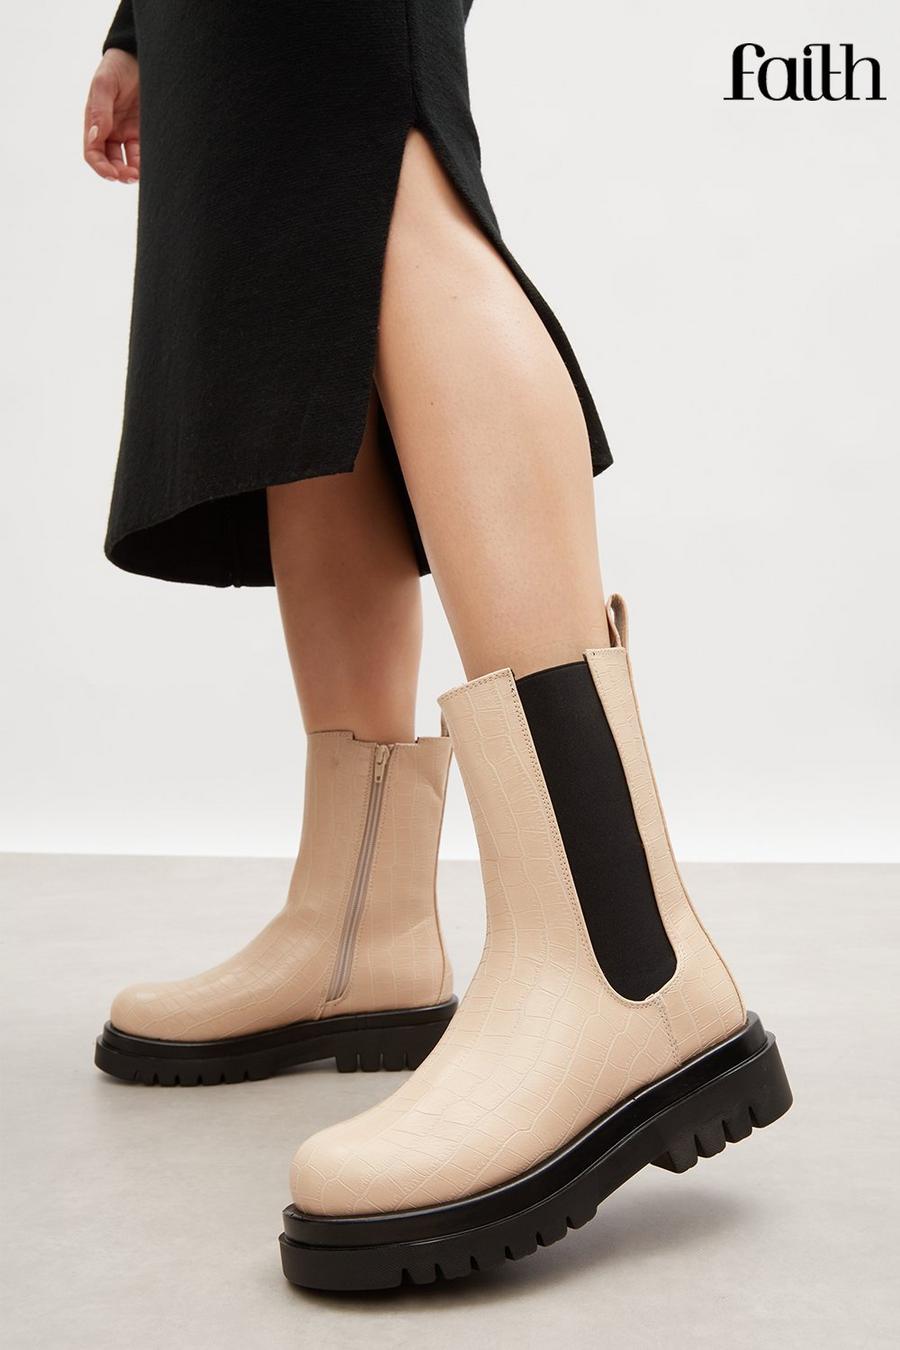 Faith: Nells Cleated Sole Chelsea Boots